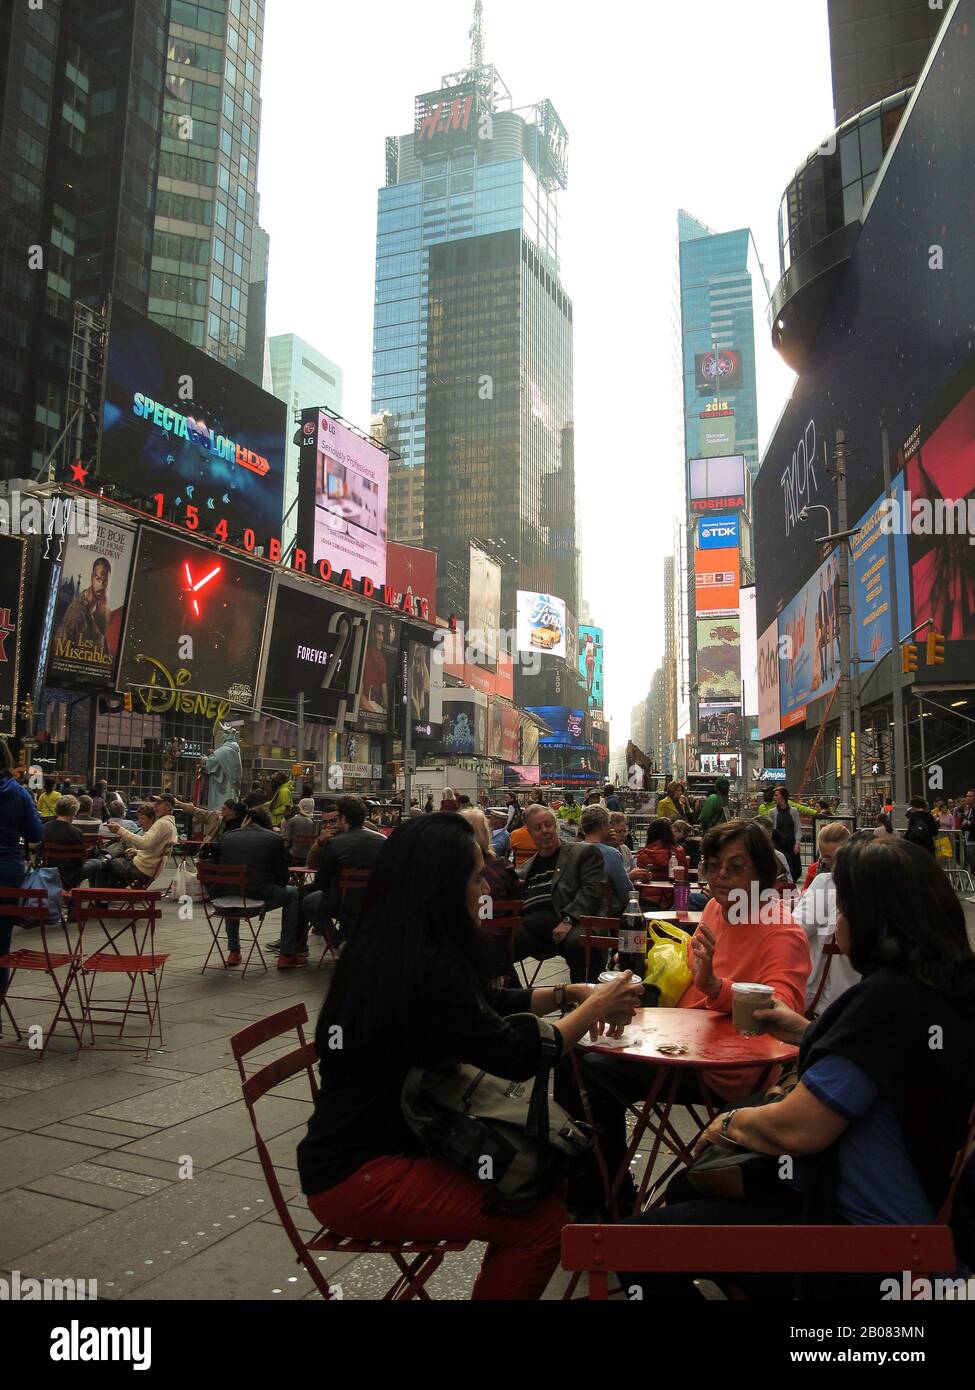 New York City candid, people eating and talking outdoors, December 13, 2015 Stock Photo